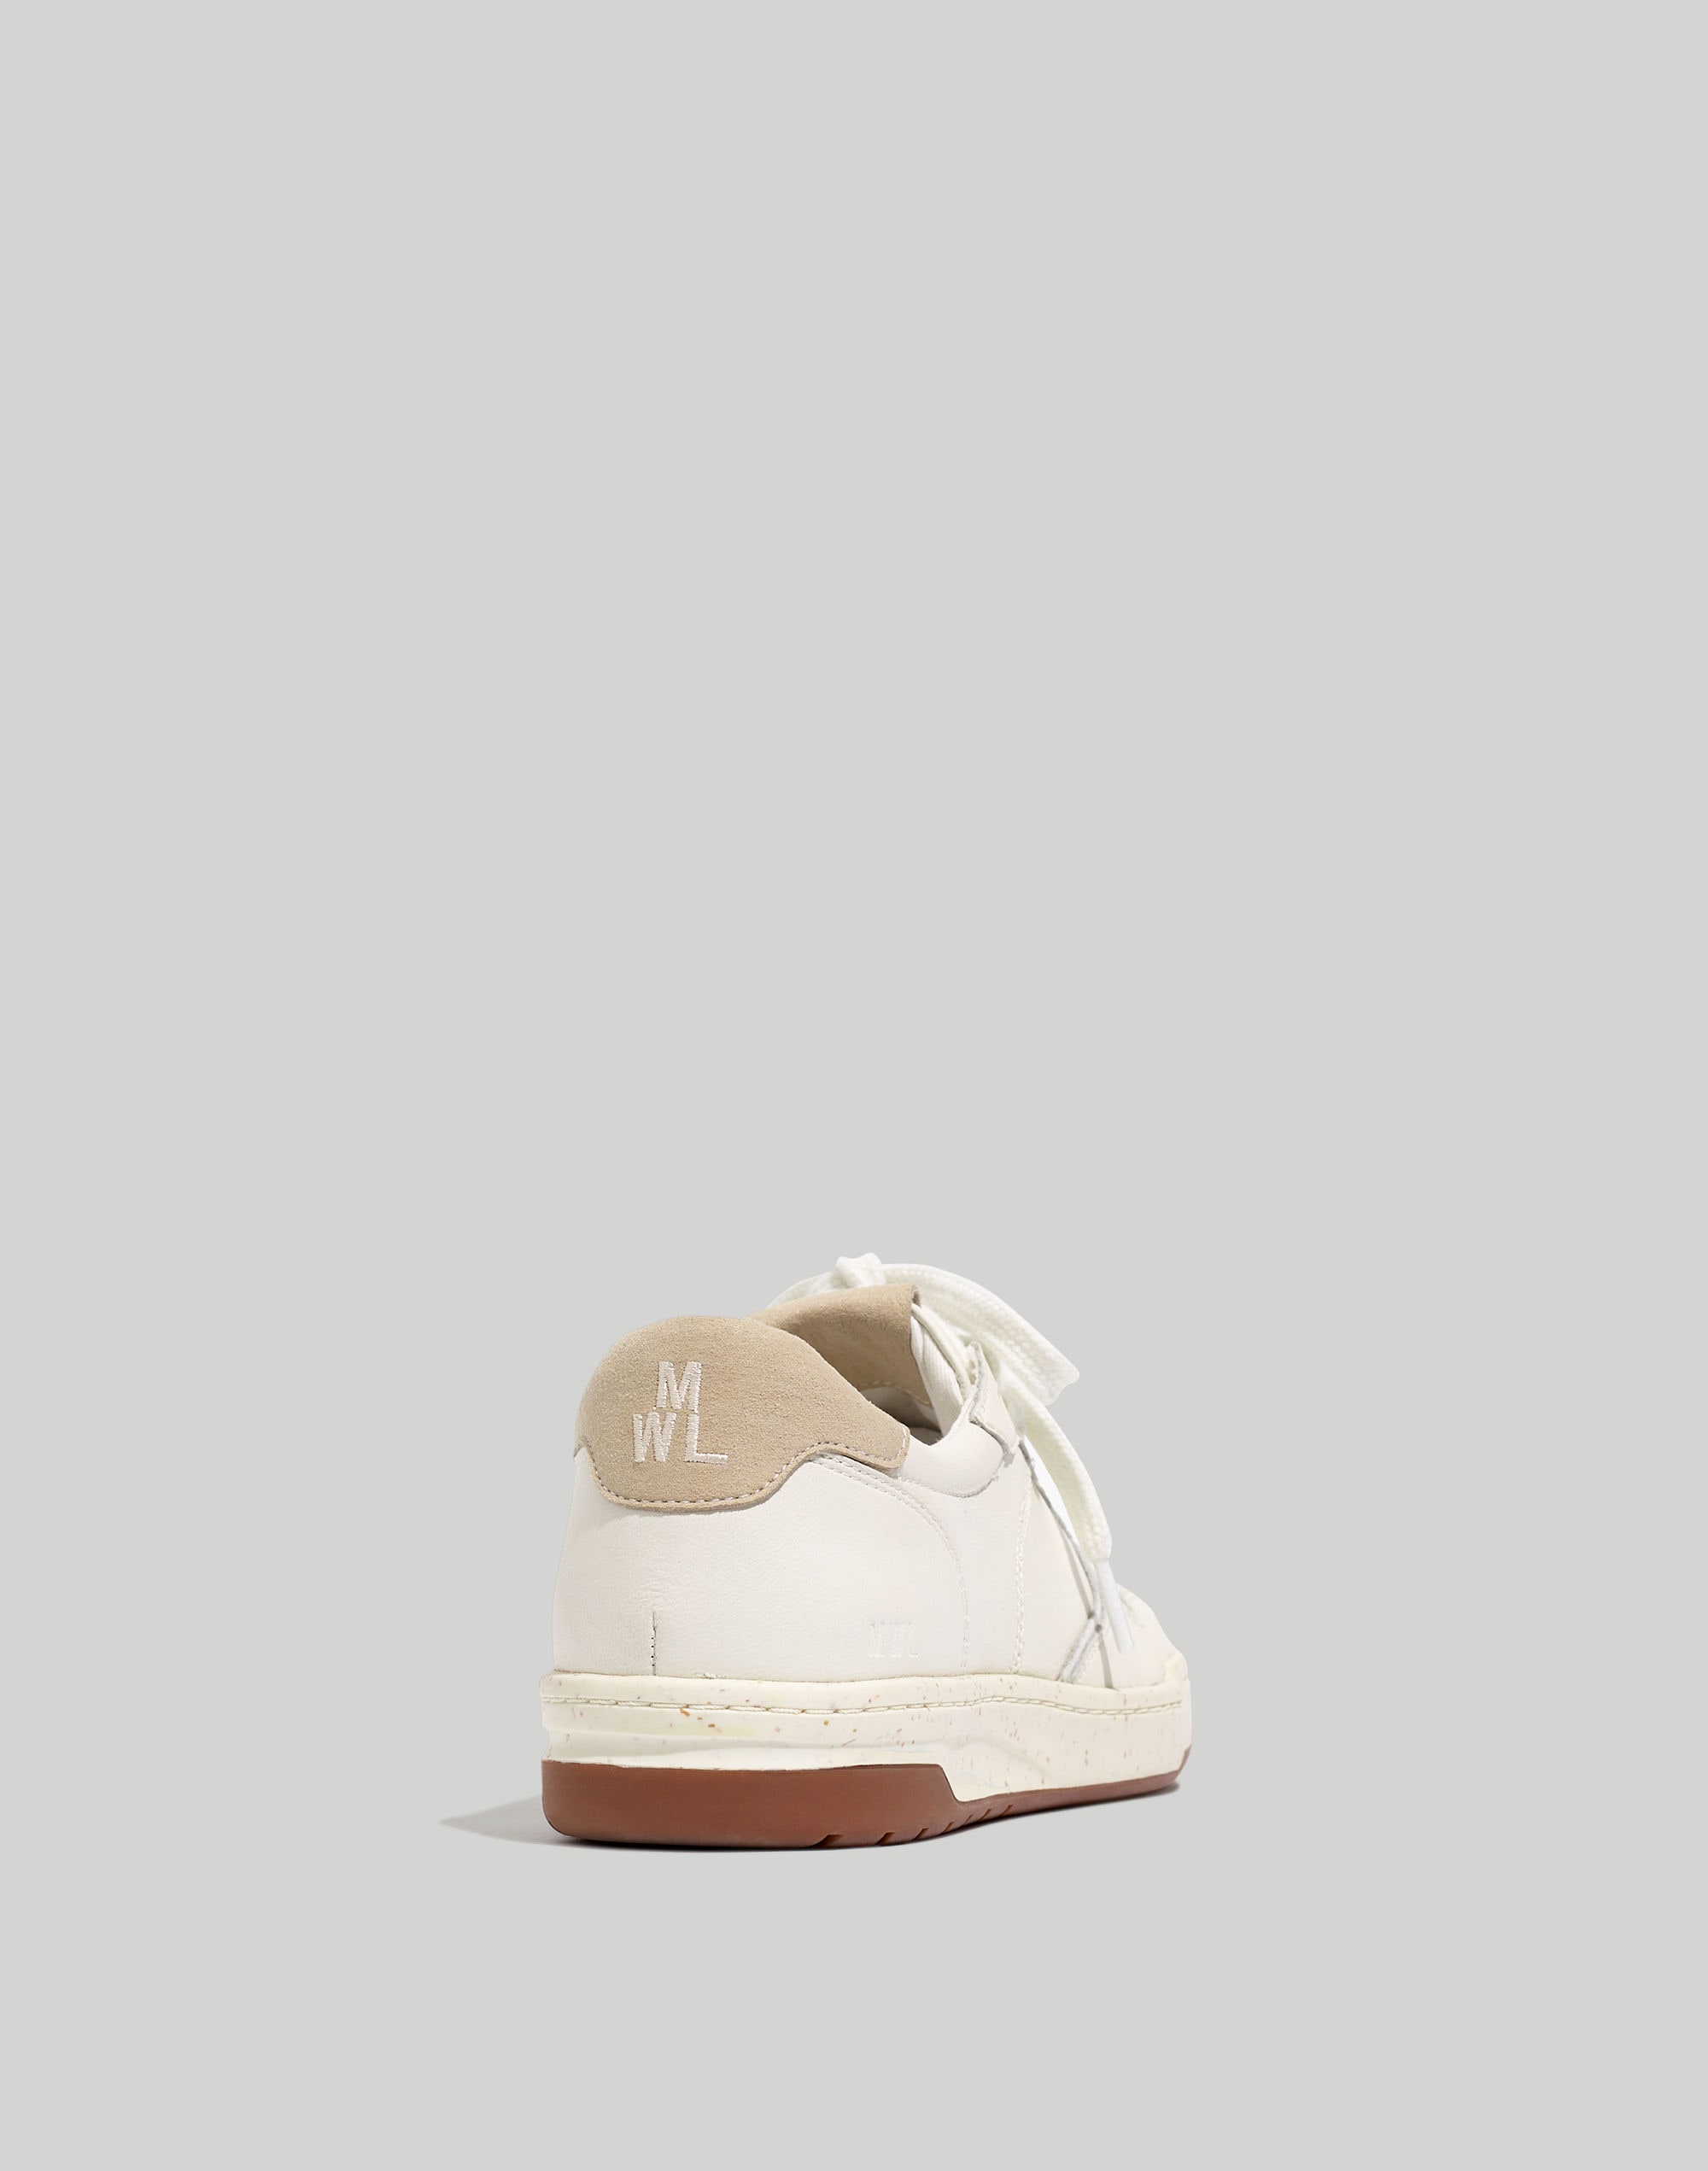 Madewell Court Sneakers in White Leather - Size 7-M